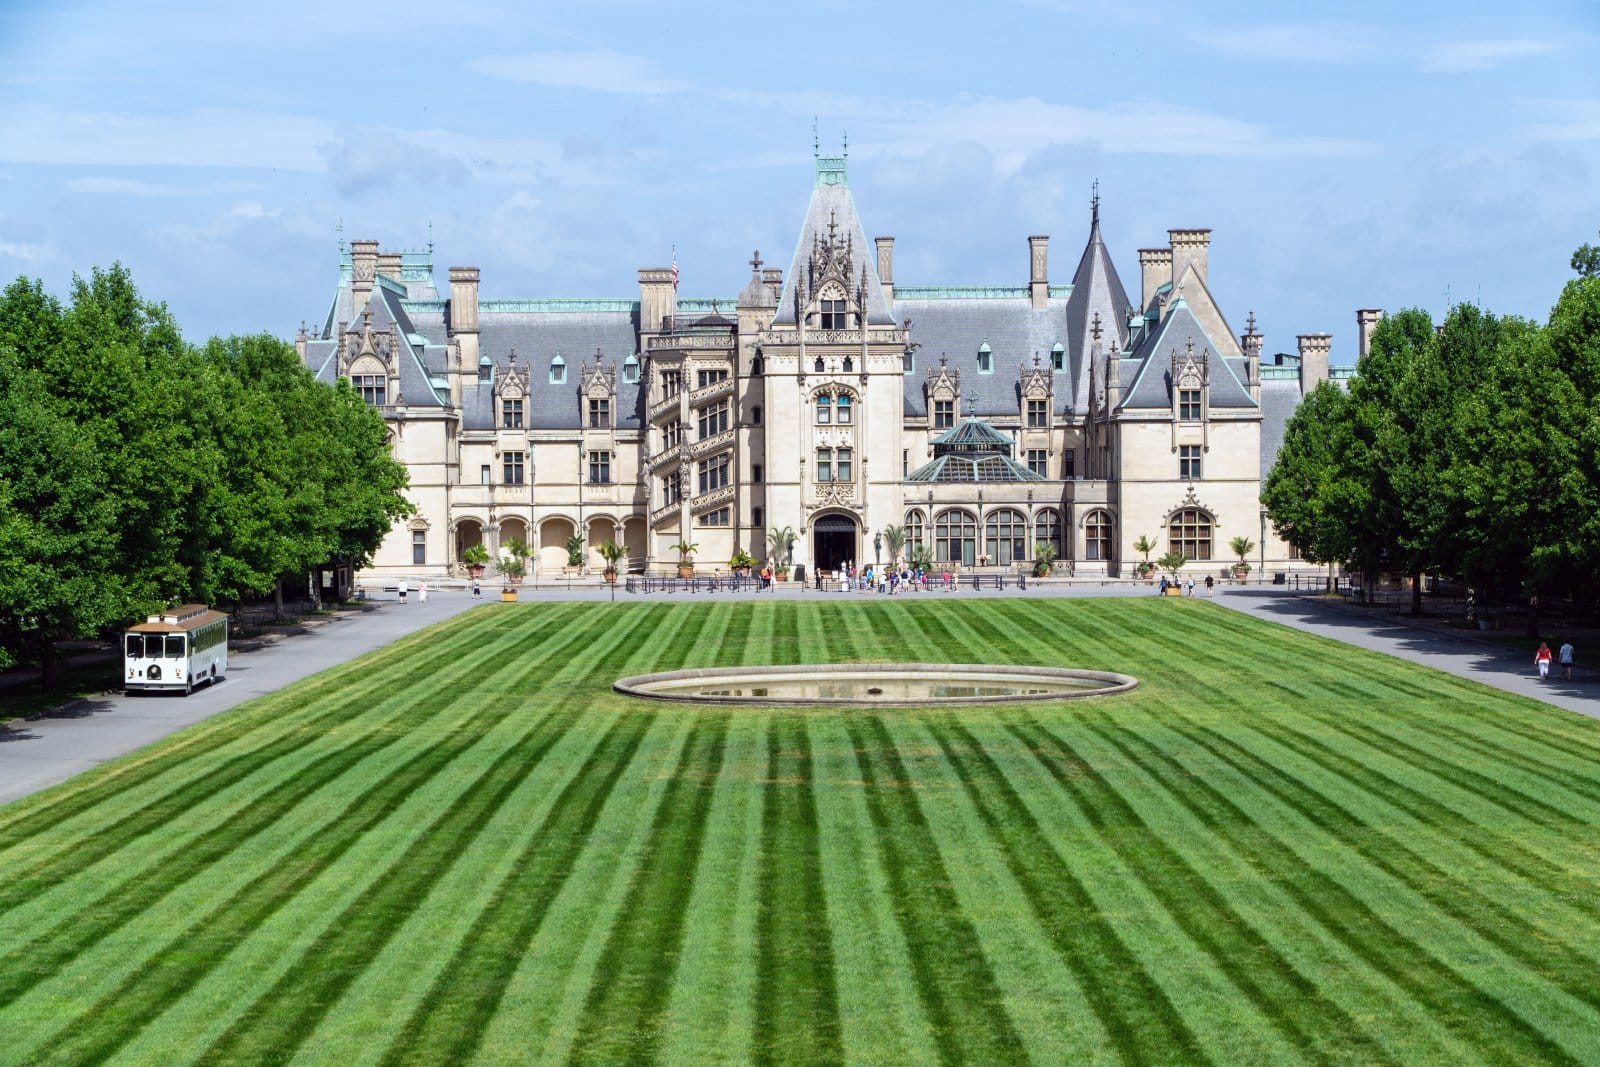 <p>North Carolina’s mountains and beaches help it generate around $25.3 billion in tourism revenue. The Biltmore Estate in Asheville charges over $60 for daytime admission.</p>